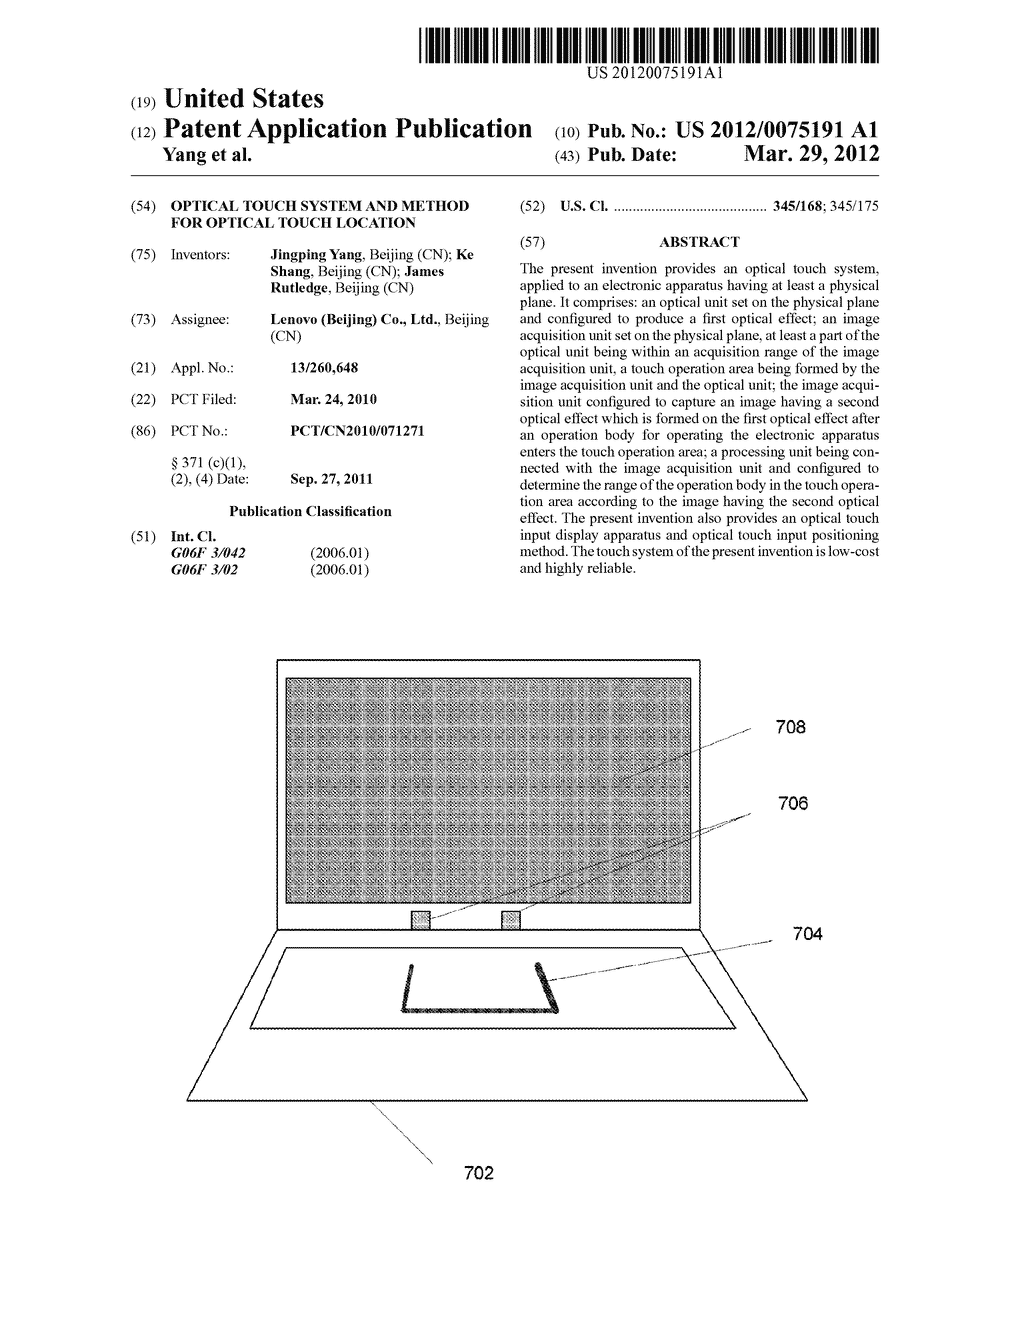 Optical Touch System and Method for Optical Touch Location - diagram, schematic, and image 01